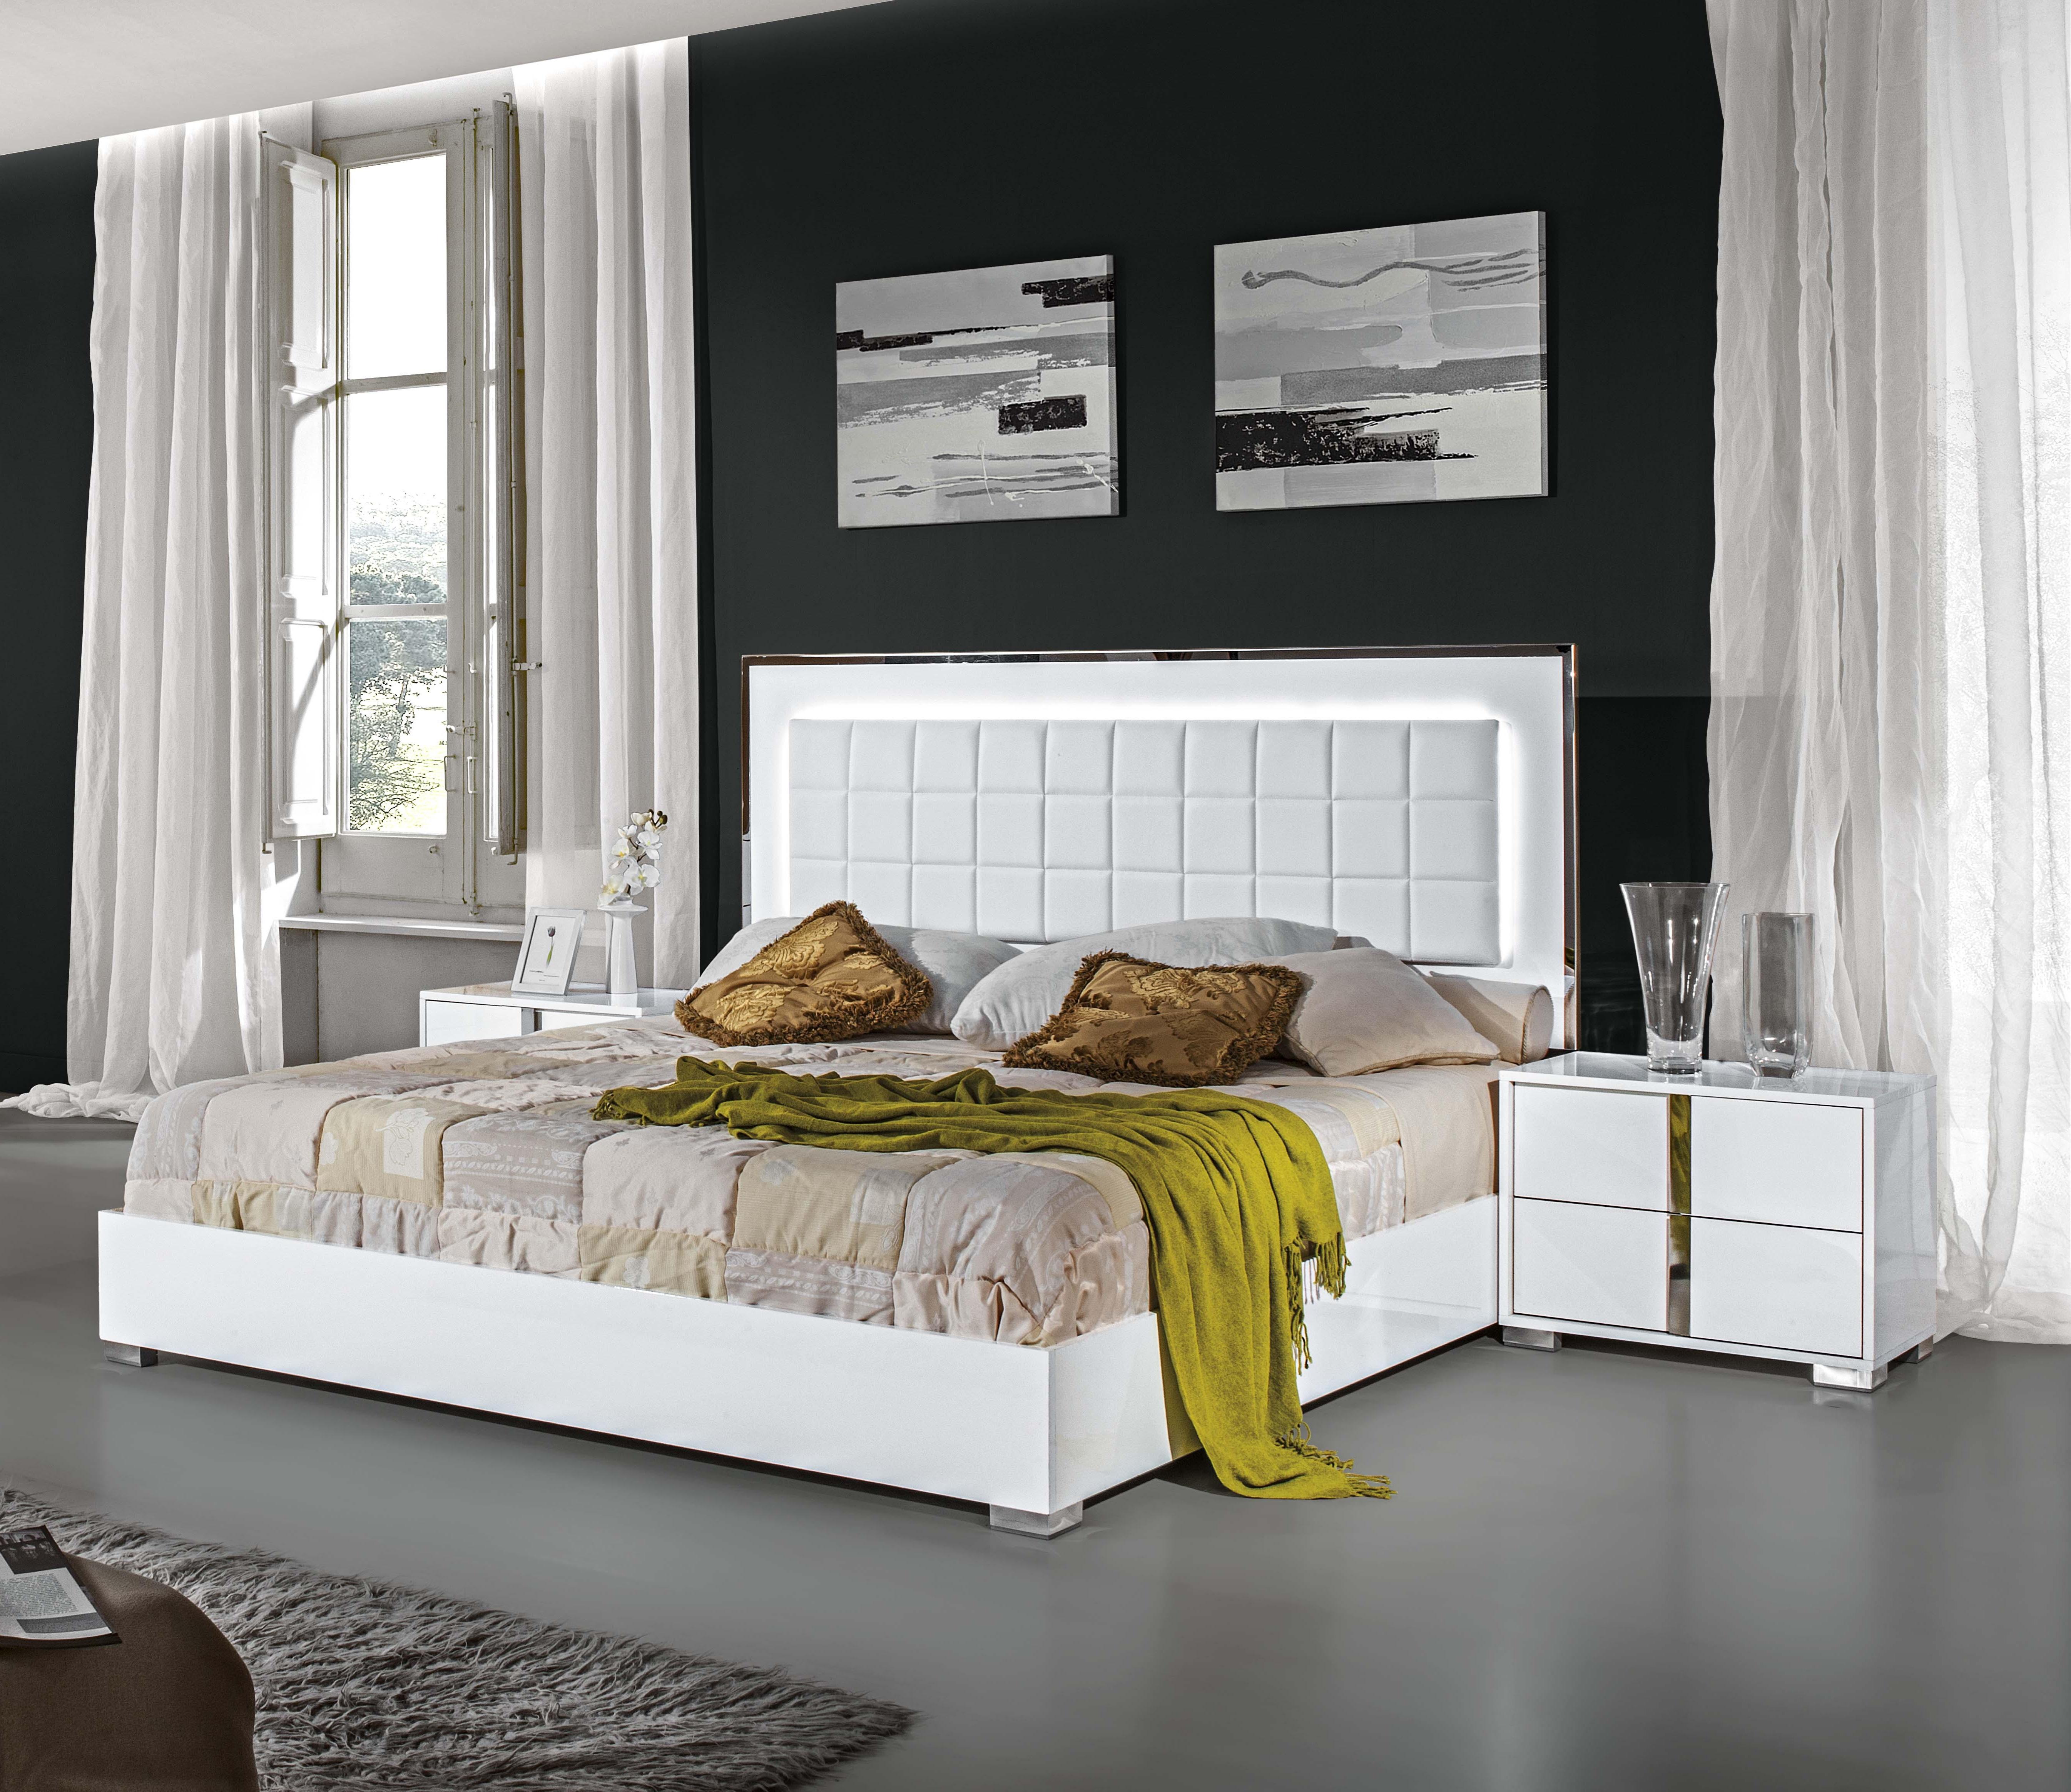 

    
Contemporary Queen Size Bedroom Set 3Pcs in White High Gloss MADE IN ITALY J&M Alice
